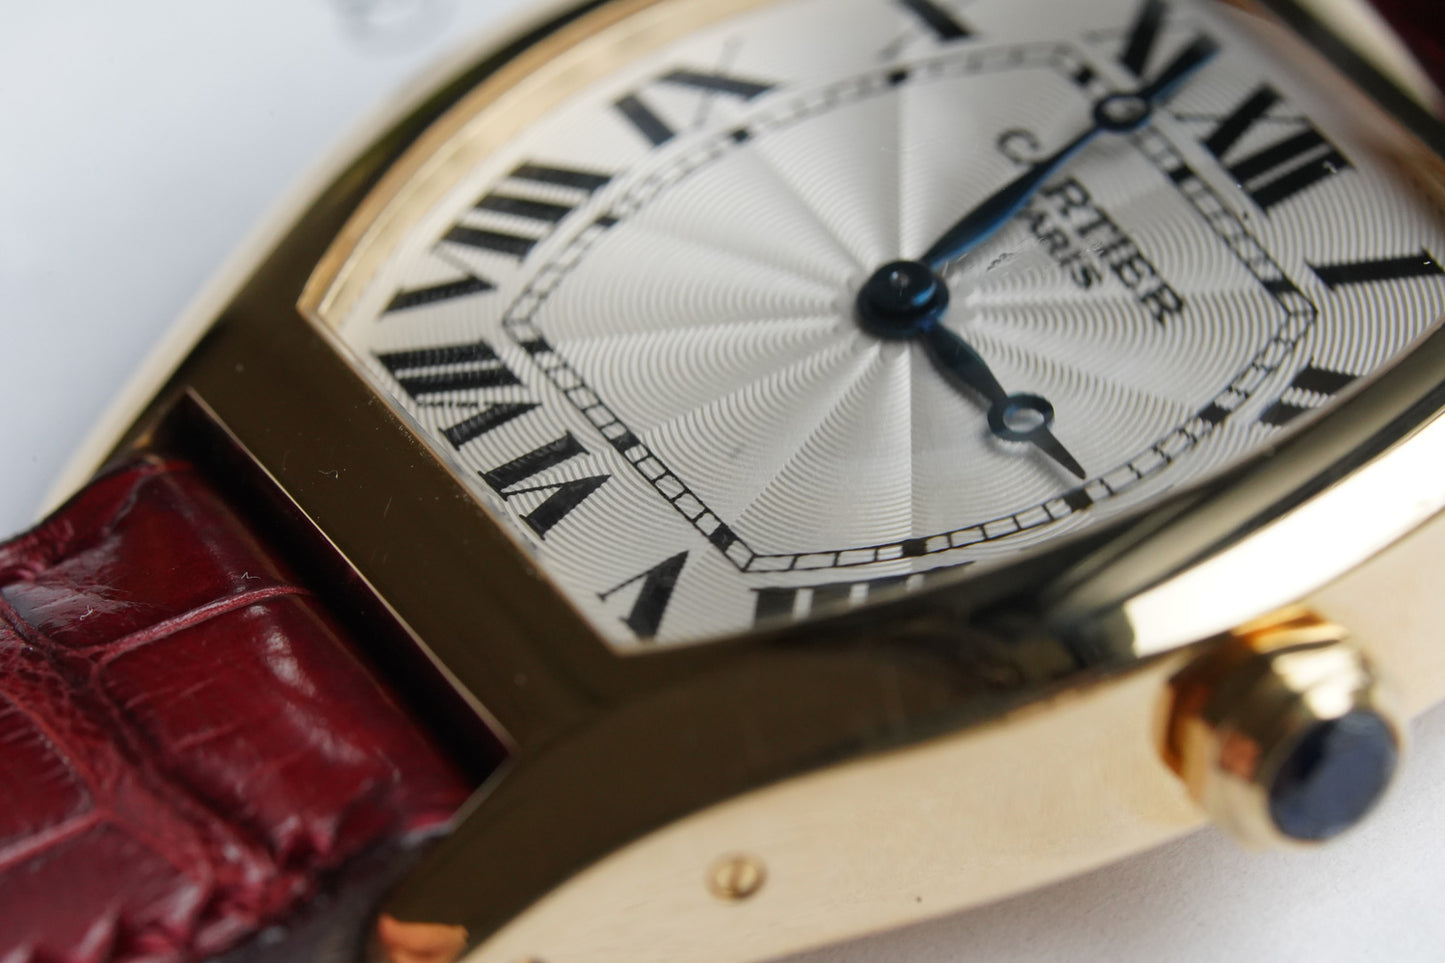 Cartier Tortue LM Yellow gold CPCP "Collection Prive"